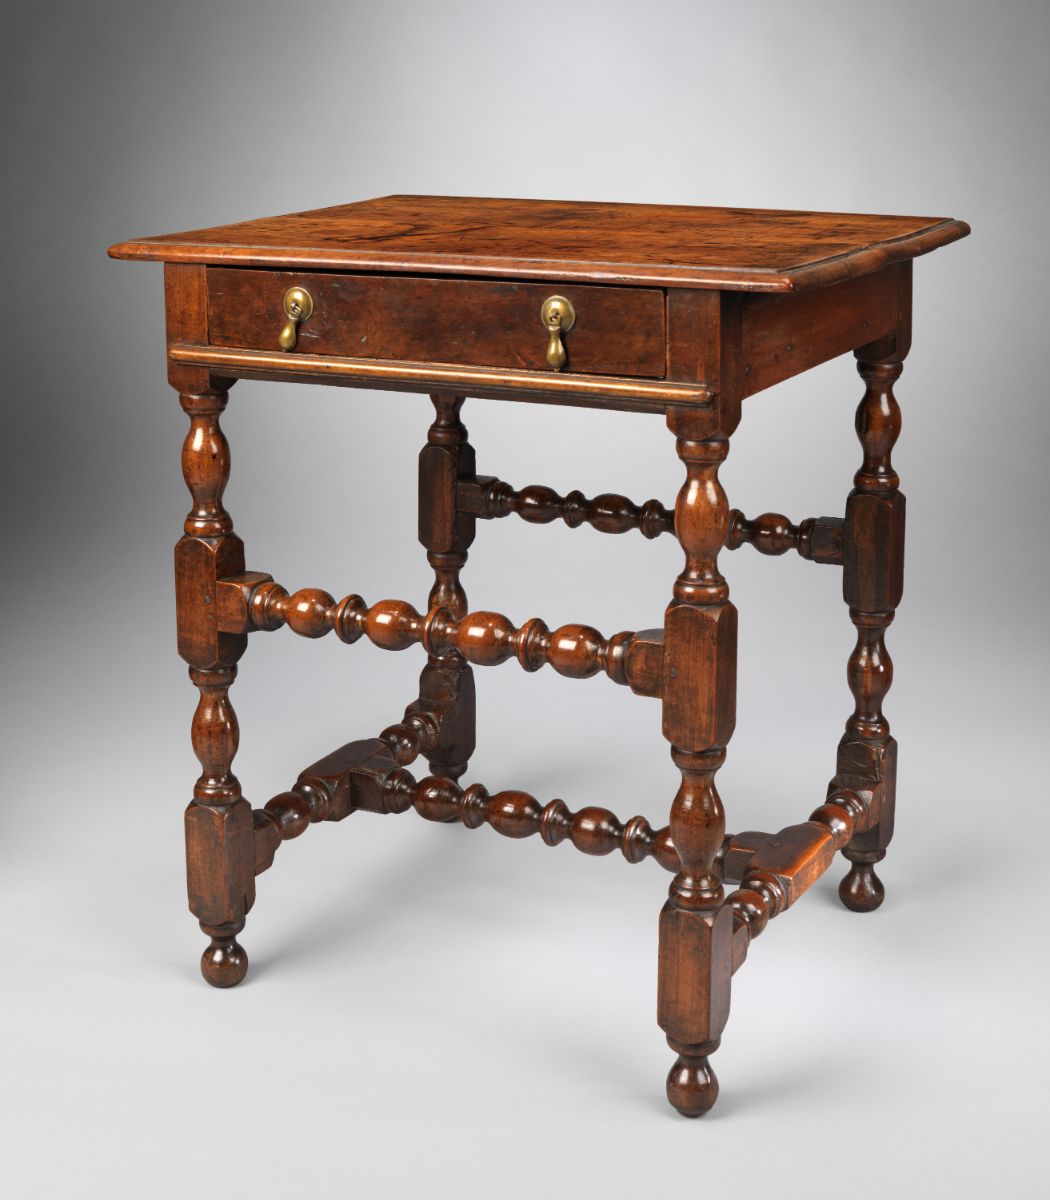 An Exceptional William and Mary Period Single Drawer Side Table